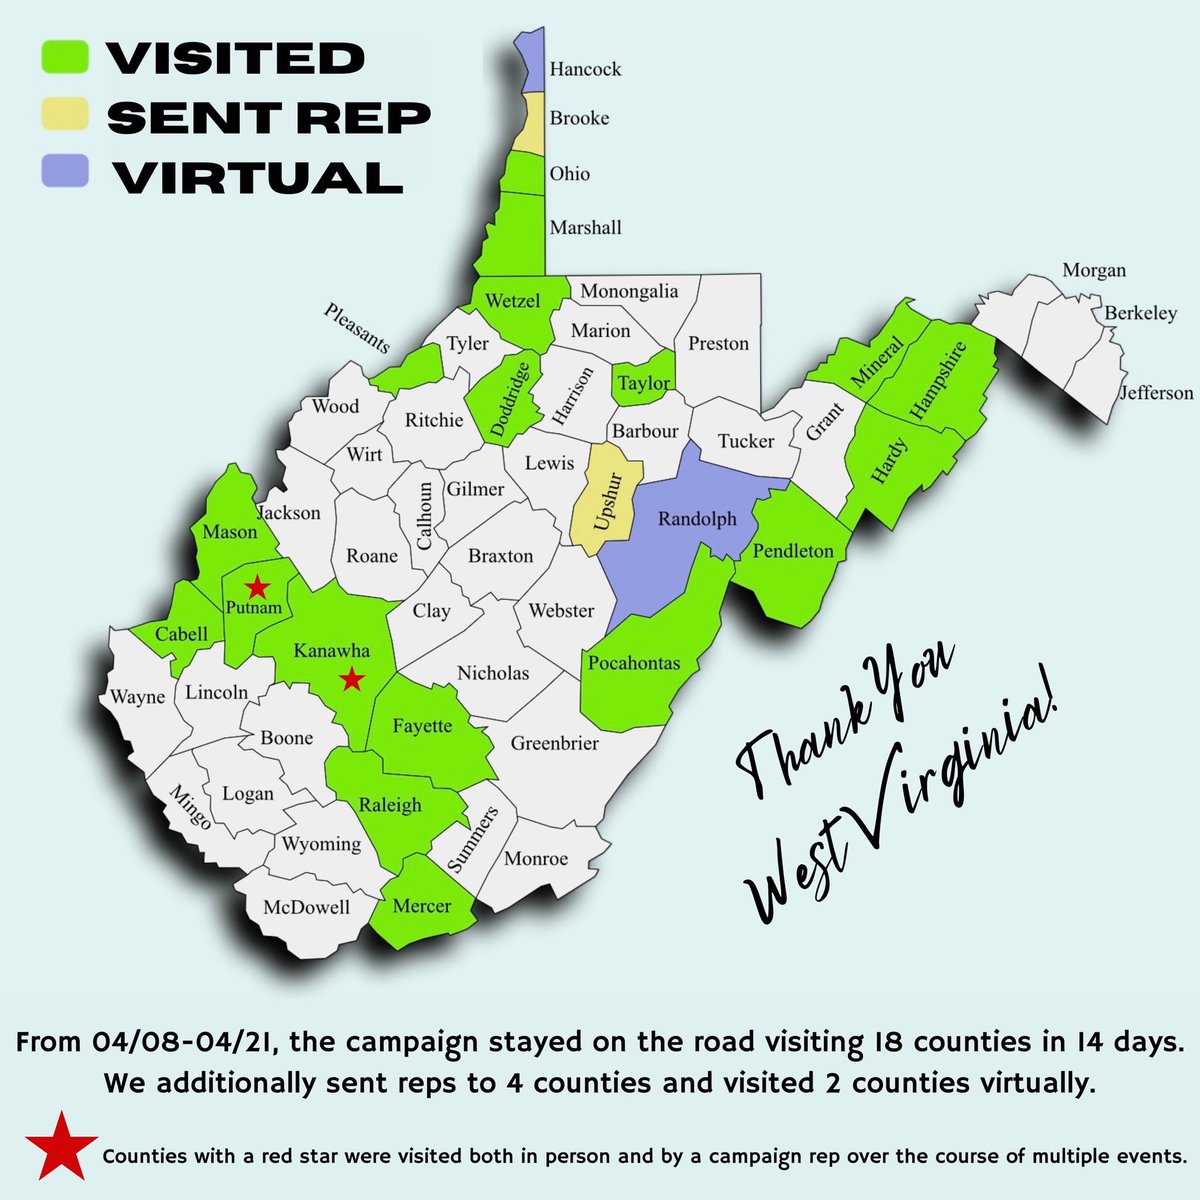 It has been a privilege to travel the state of West Virginia while on this campaign, but the past two weeks have been truly extraordinary. In 14 days, we visited 18 counties in person, visited 2 counties virtually, visited 2 counties in person and also via representative and had